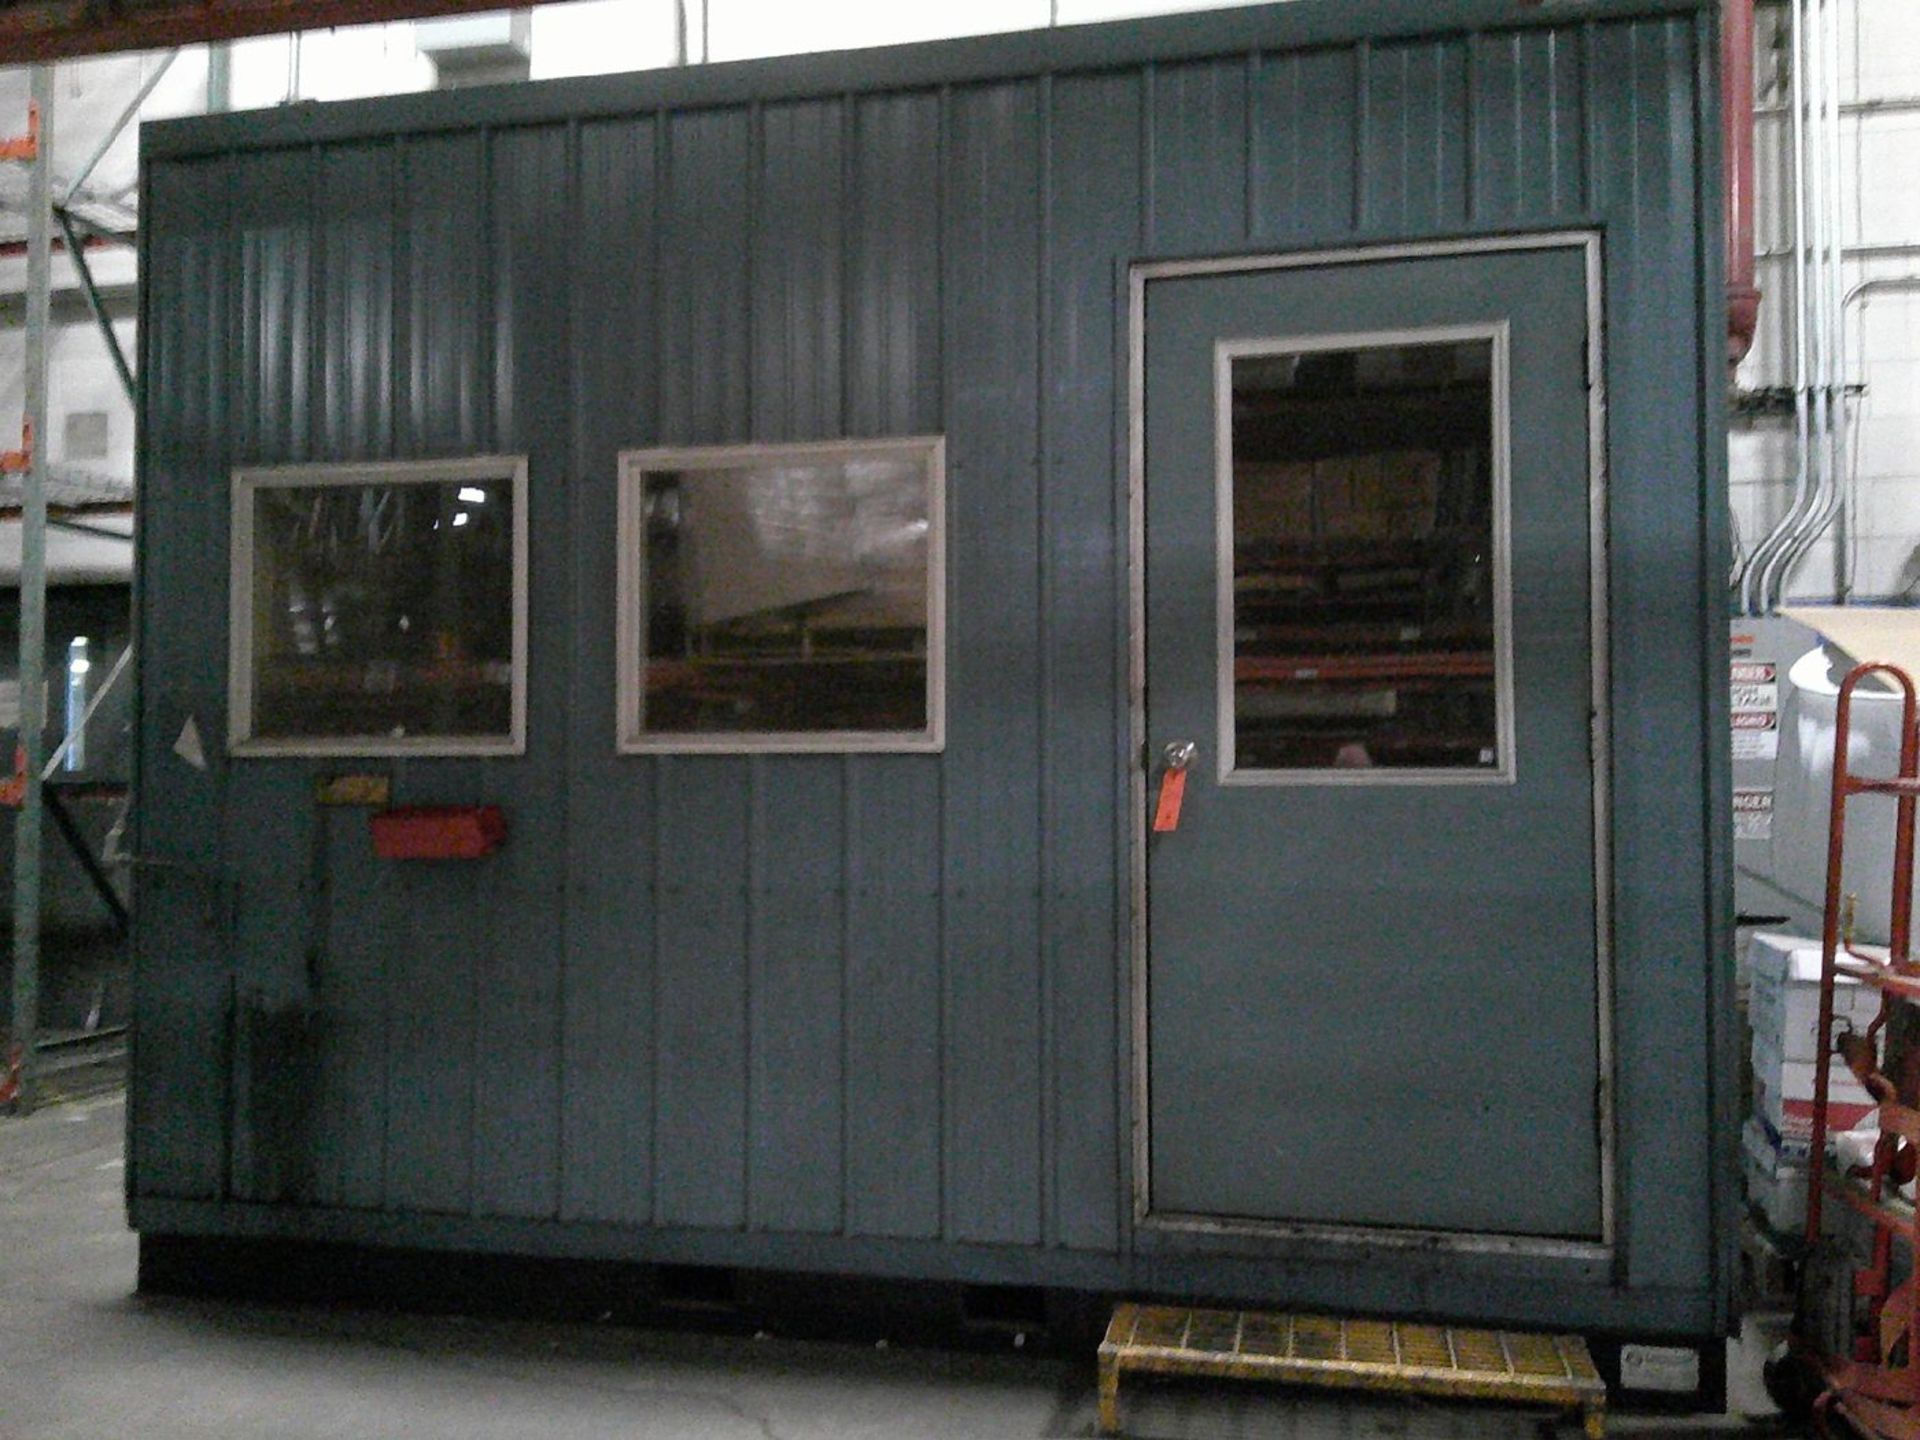 Speed Space 120" x 144" x 114" High Steel Modular Shop Office; with Door, Air Conditioner, Windows - Image 2 of 4